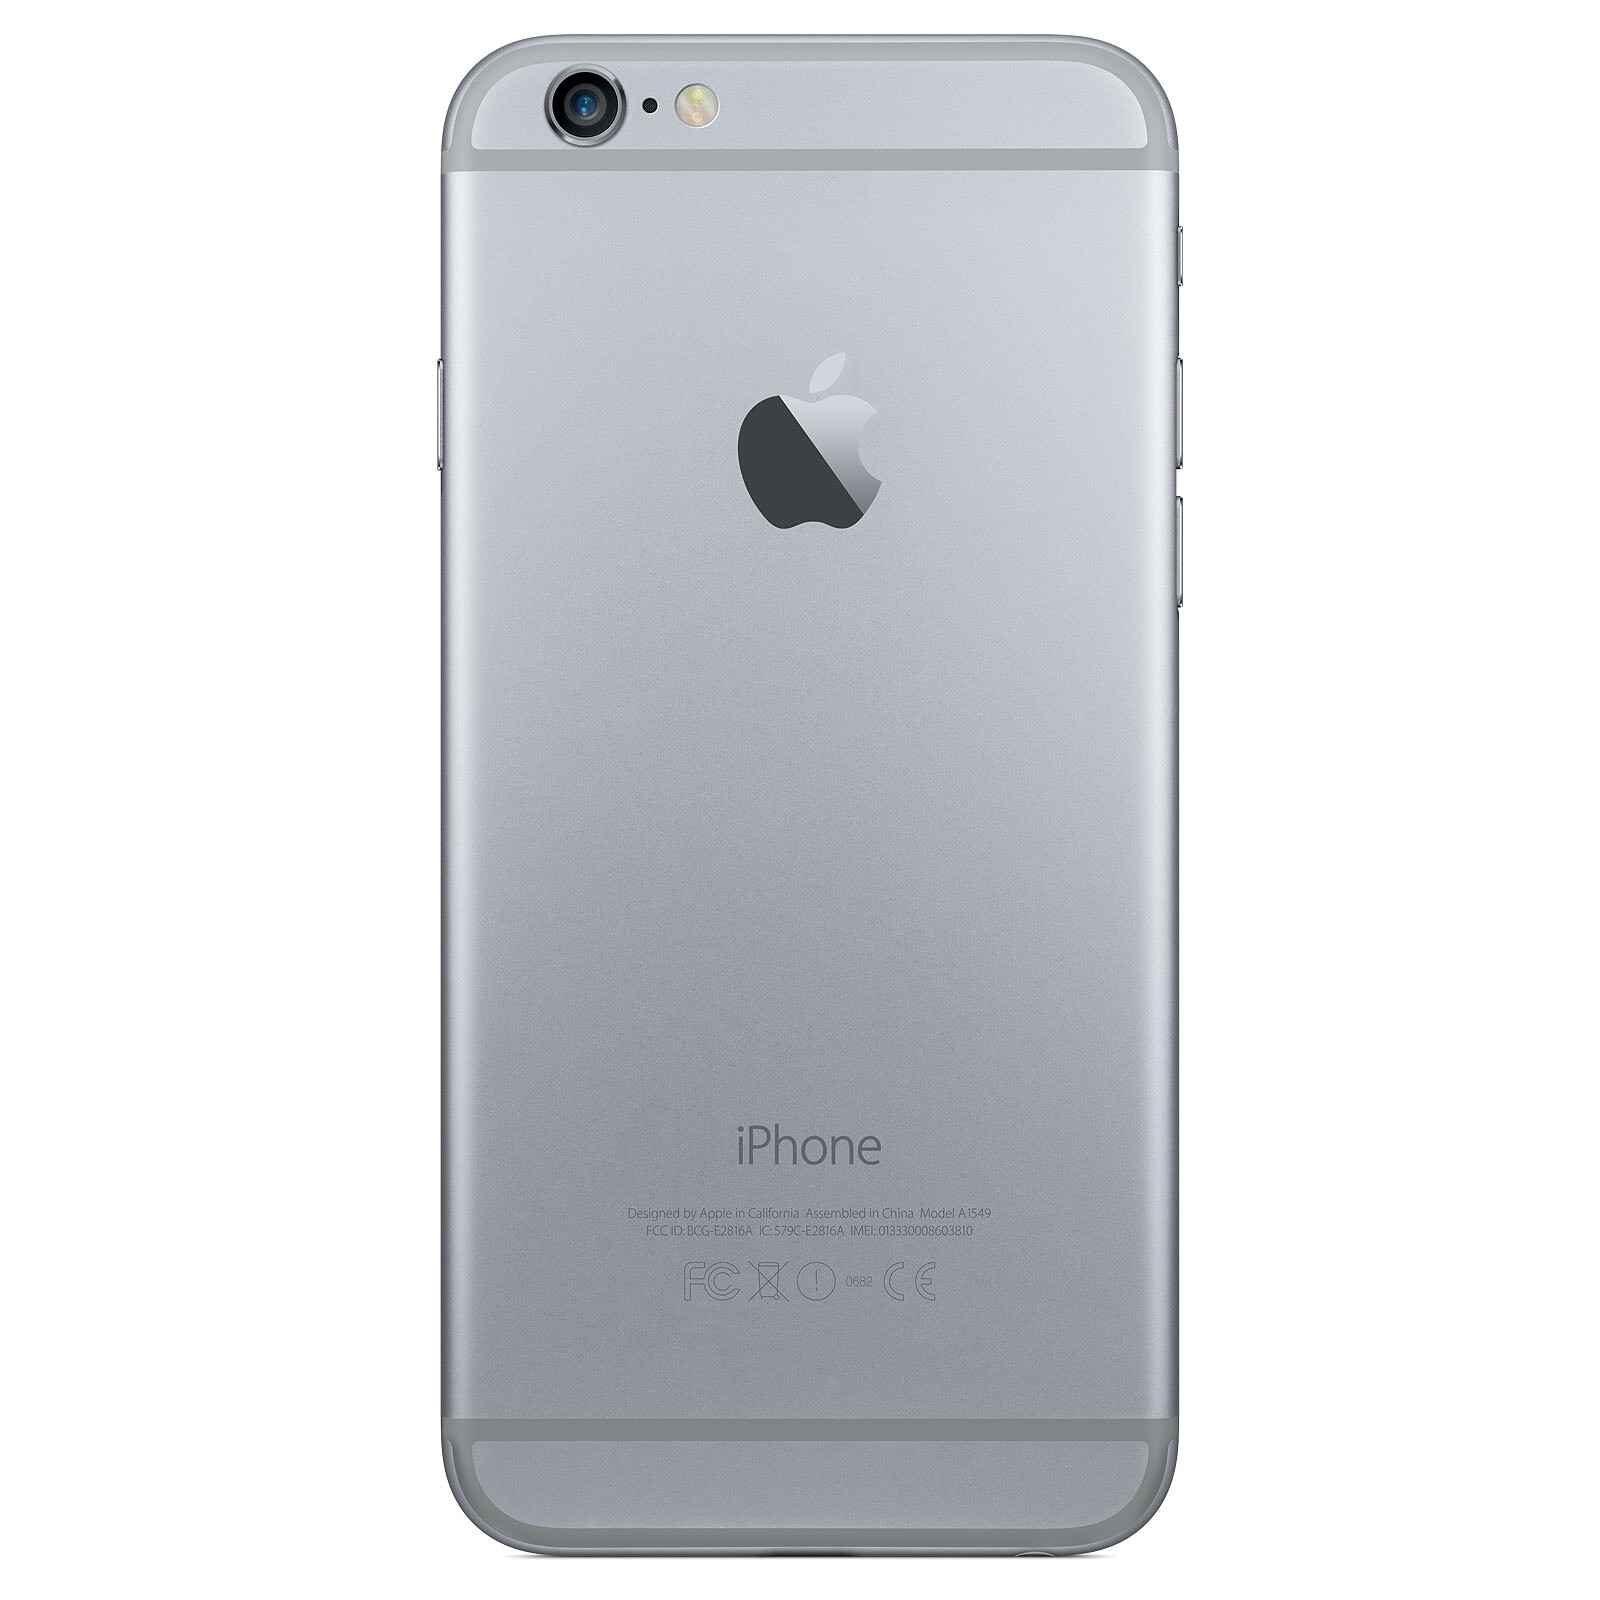 Apple Iphone 6 32 Go Gris Sideral Reconditionne Mobile Smartphone Apple Sur Ldlc